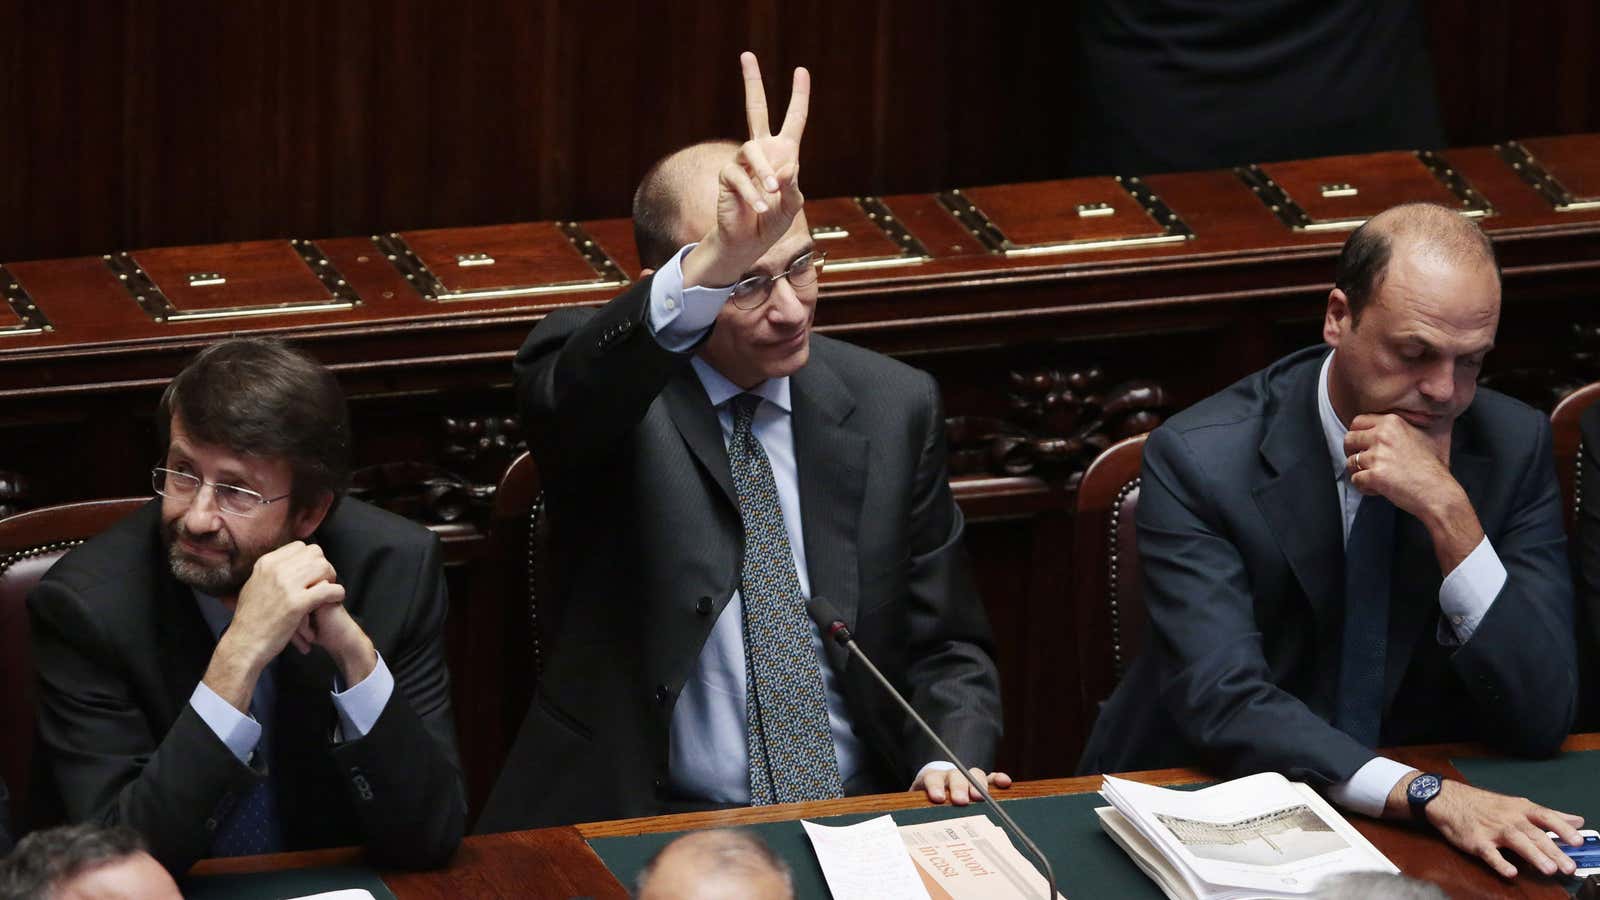 Enrico Letta: V is for victory.